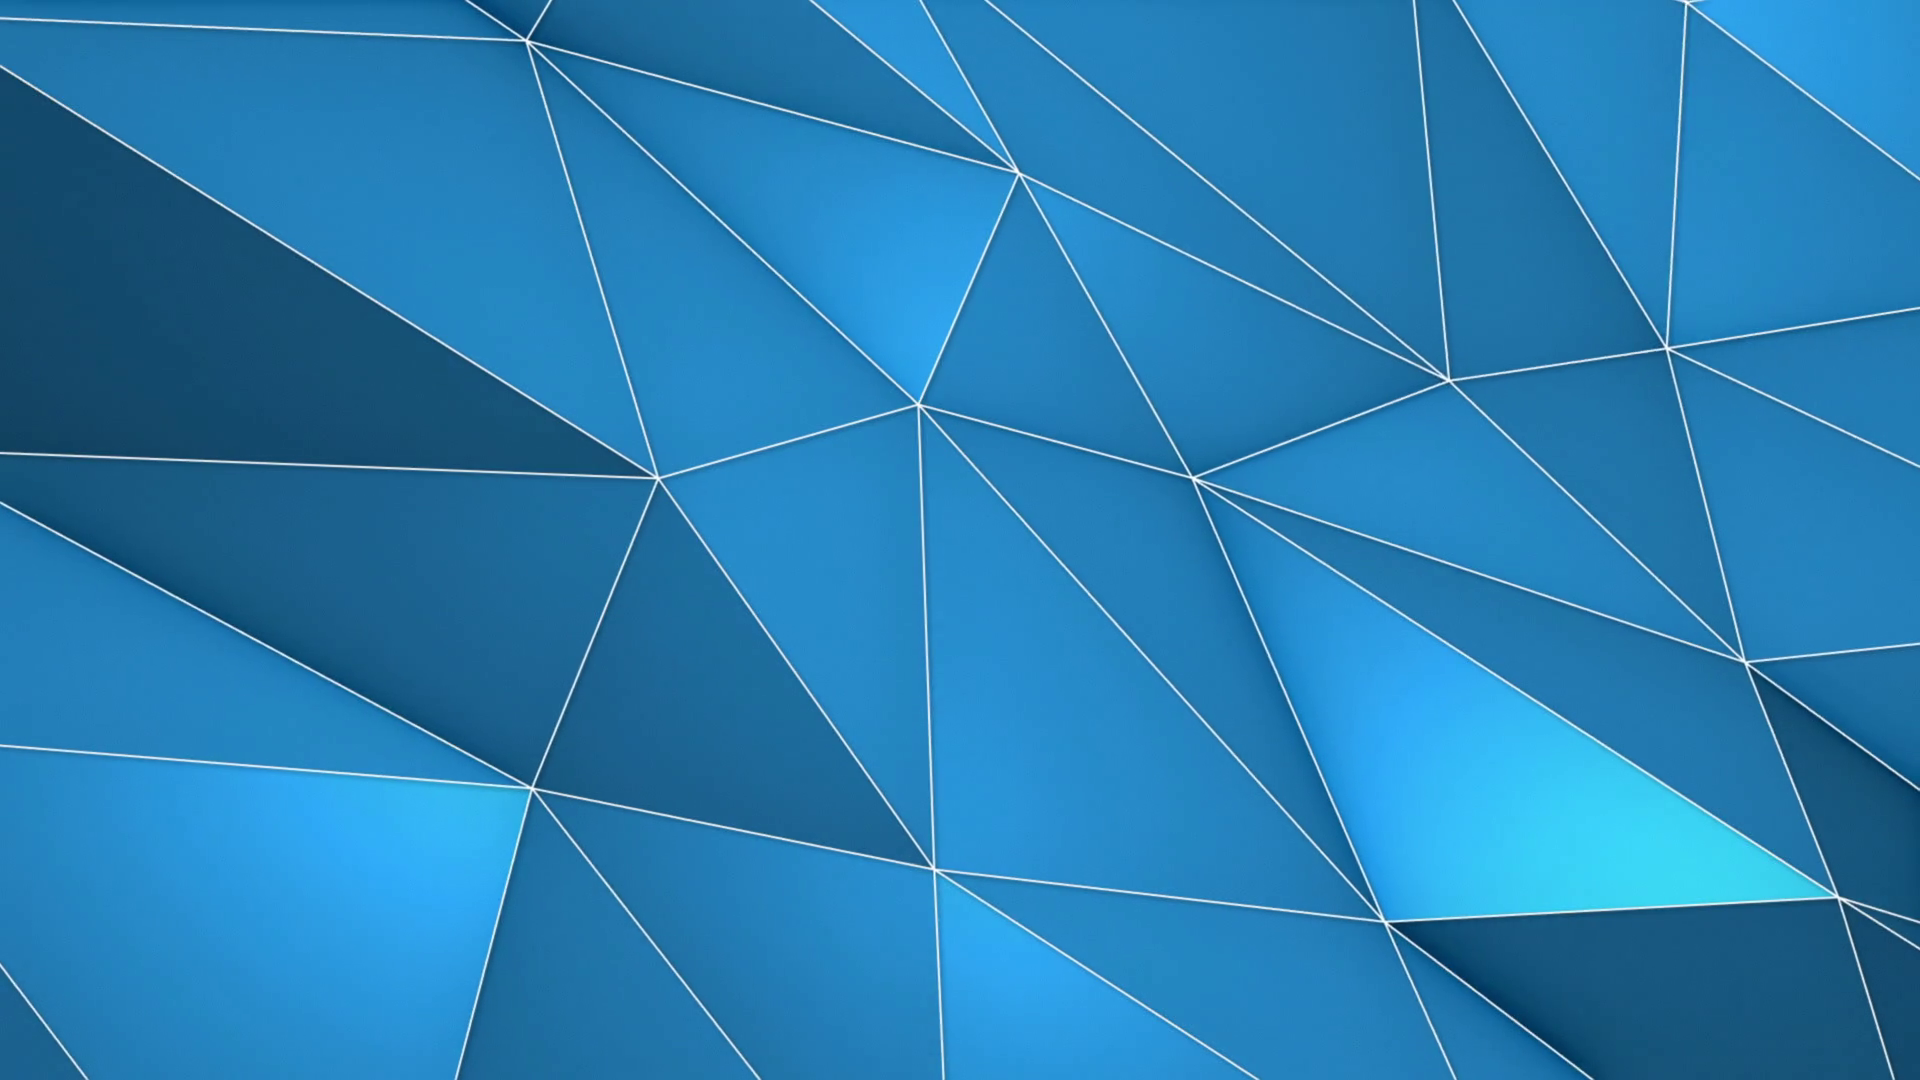 Elegant Polygonal Surface | Triangular Polygons with Outlines | Low ...